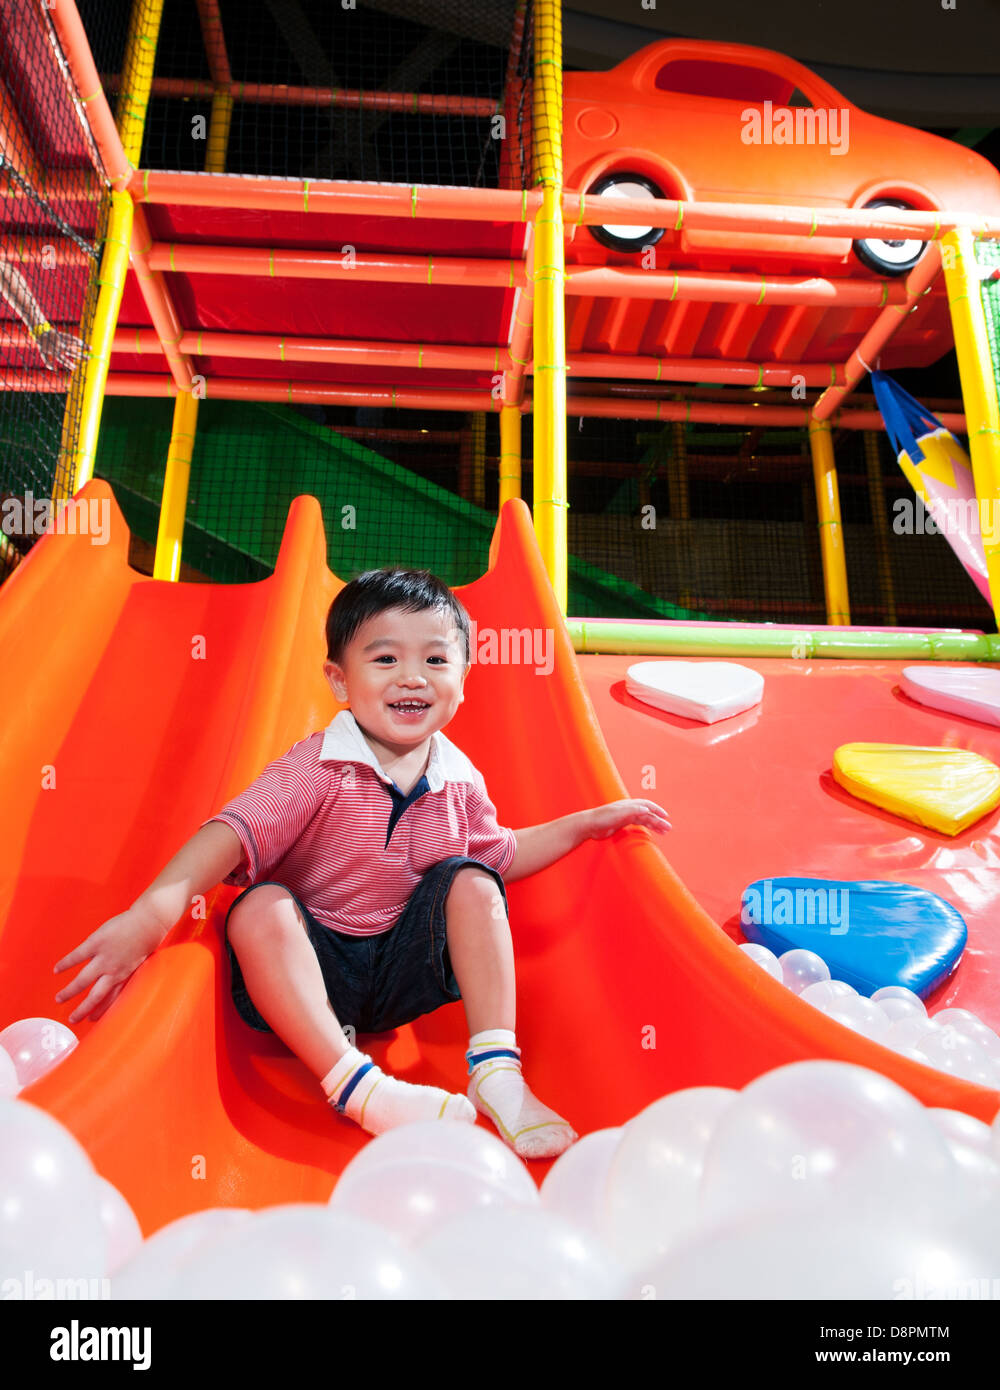 Young Boy In Indoor Playground Stock Photo